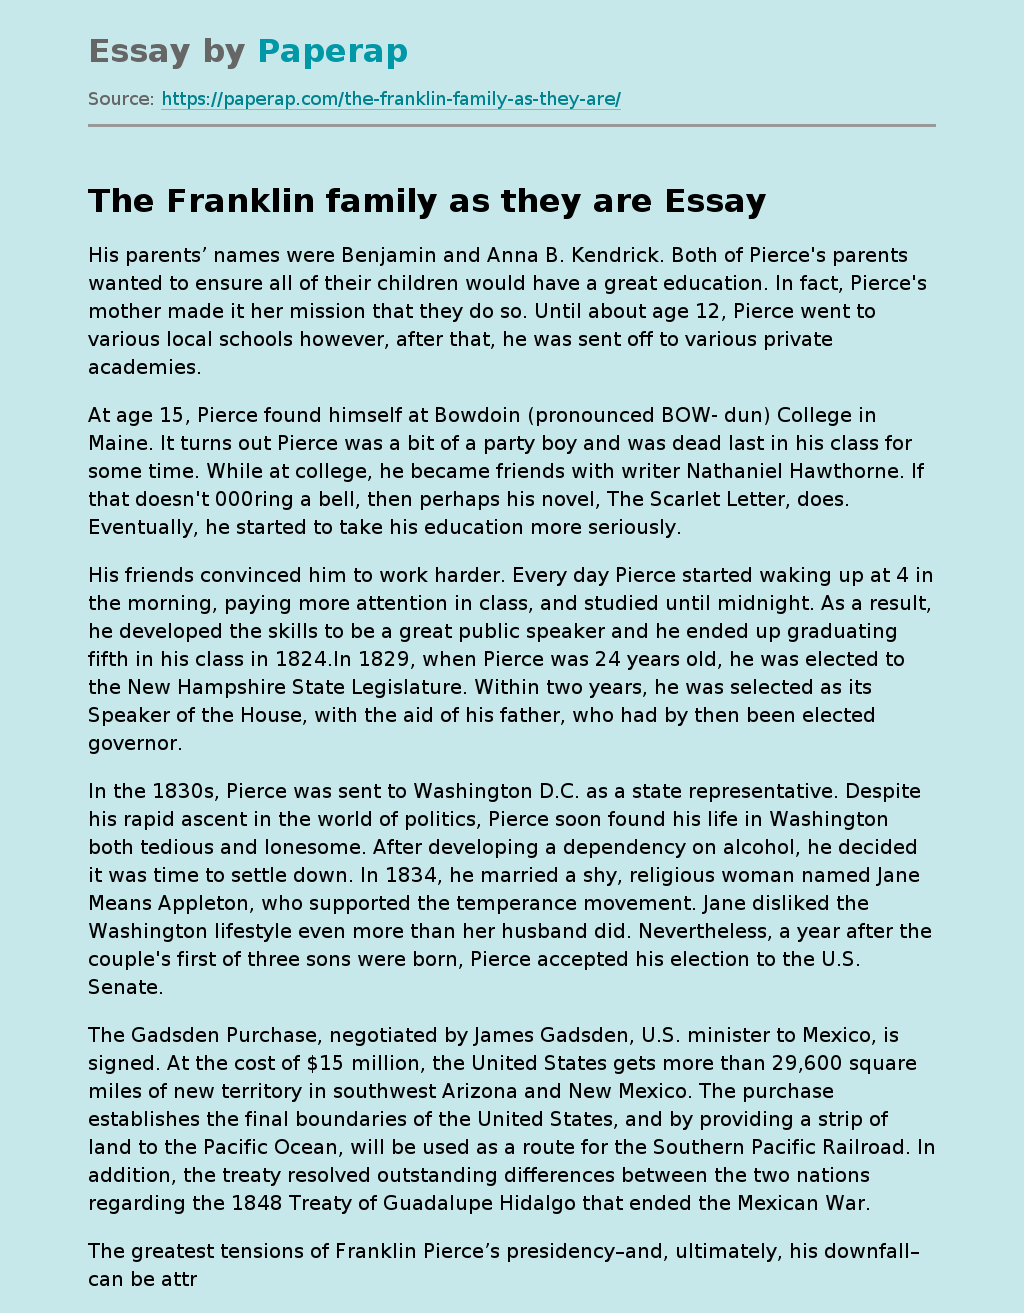 The Franklin family as they are